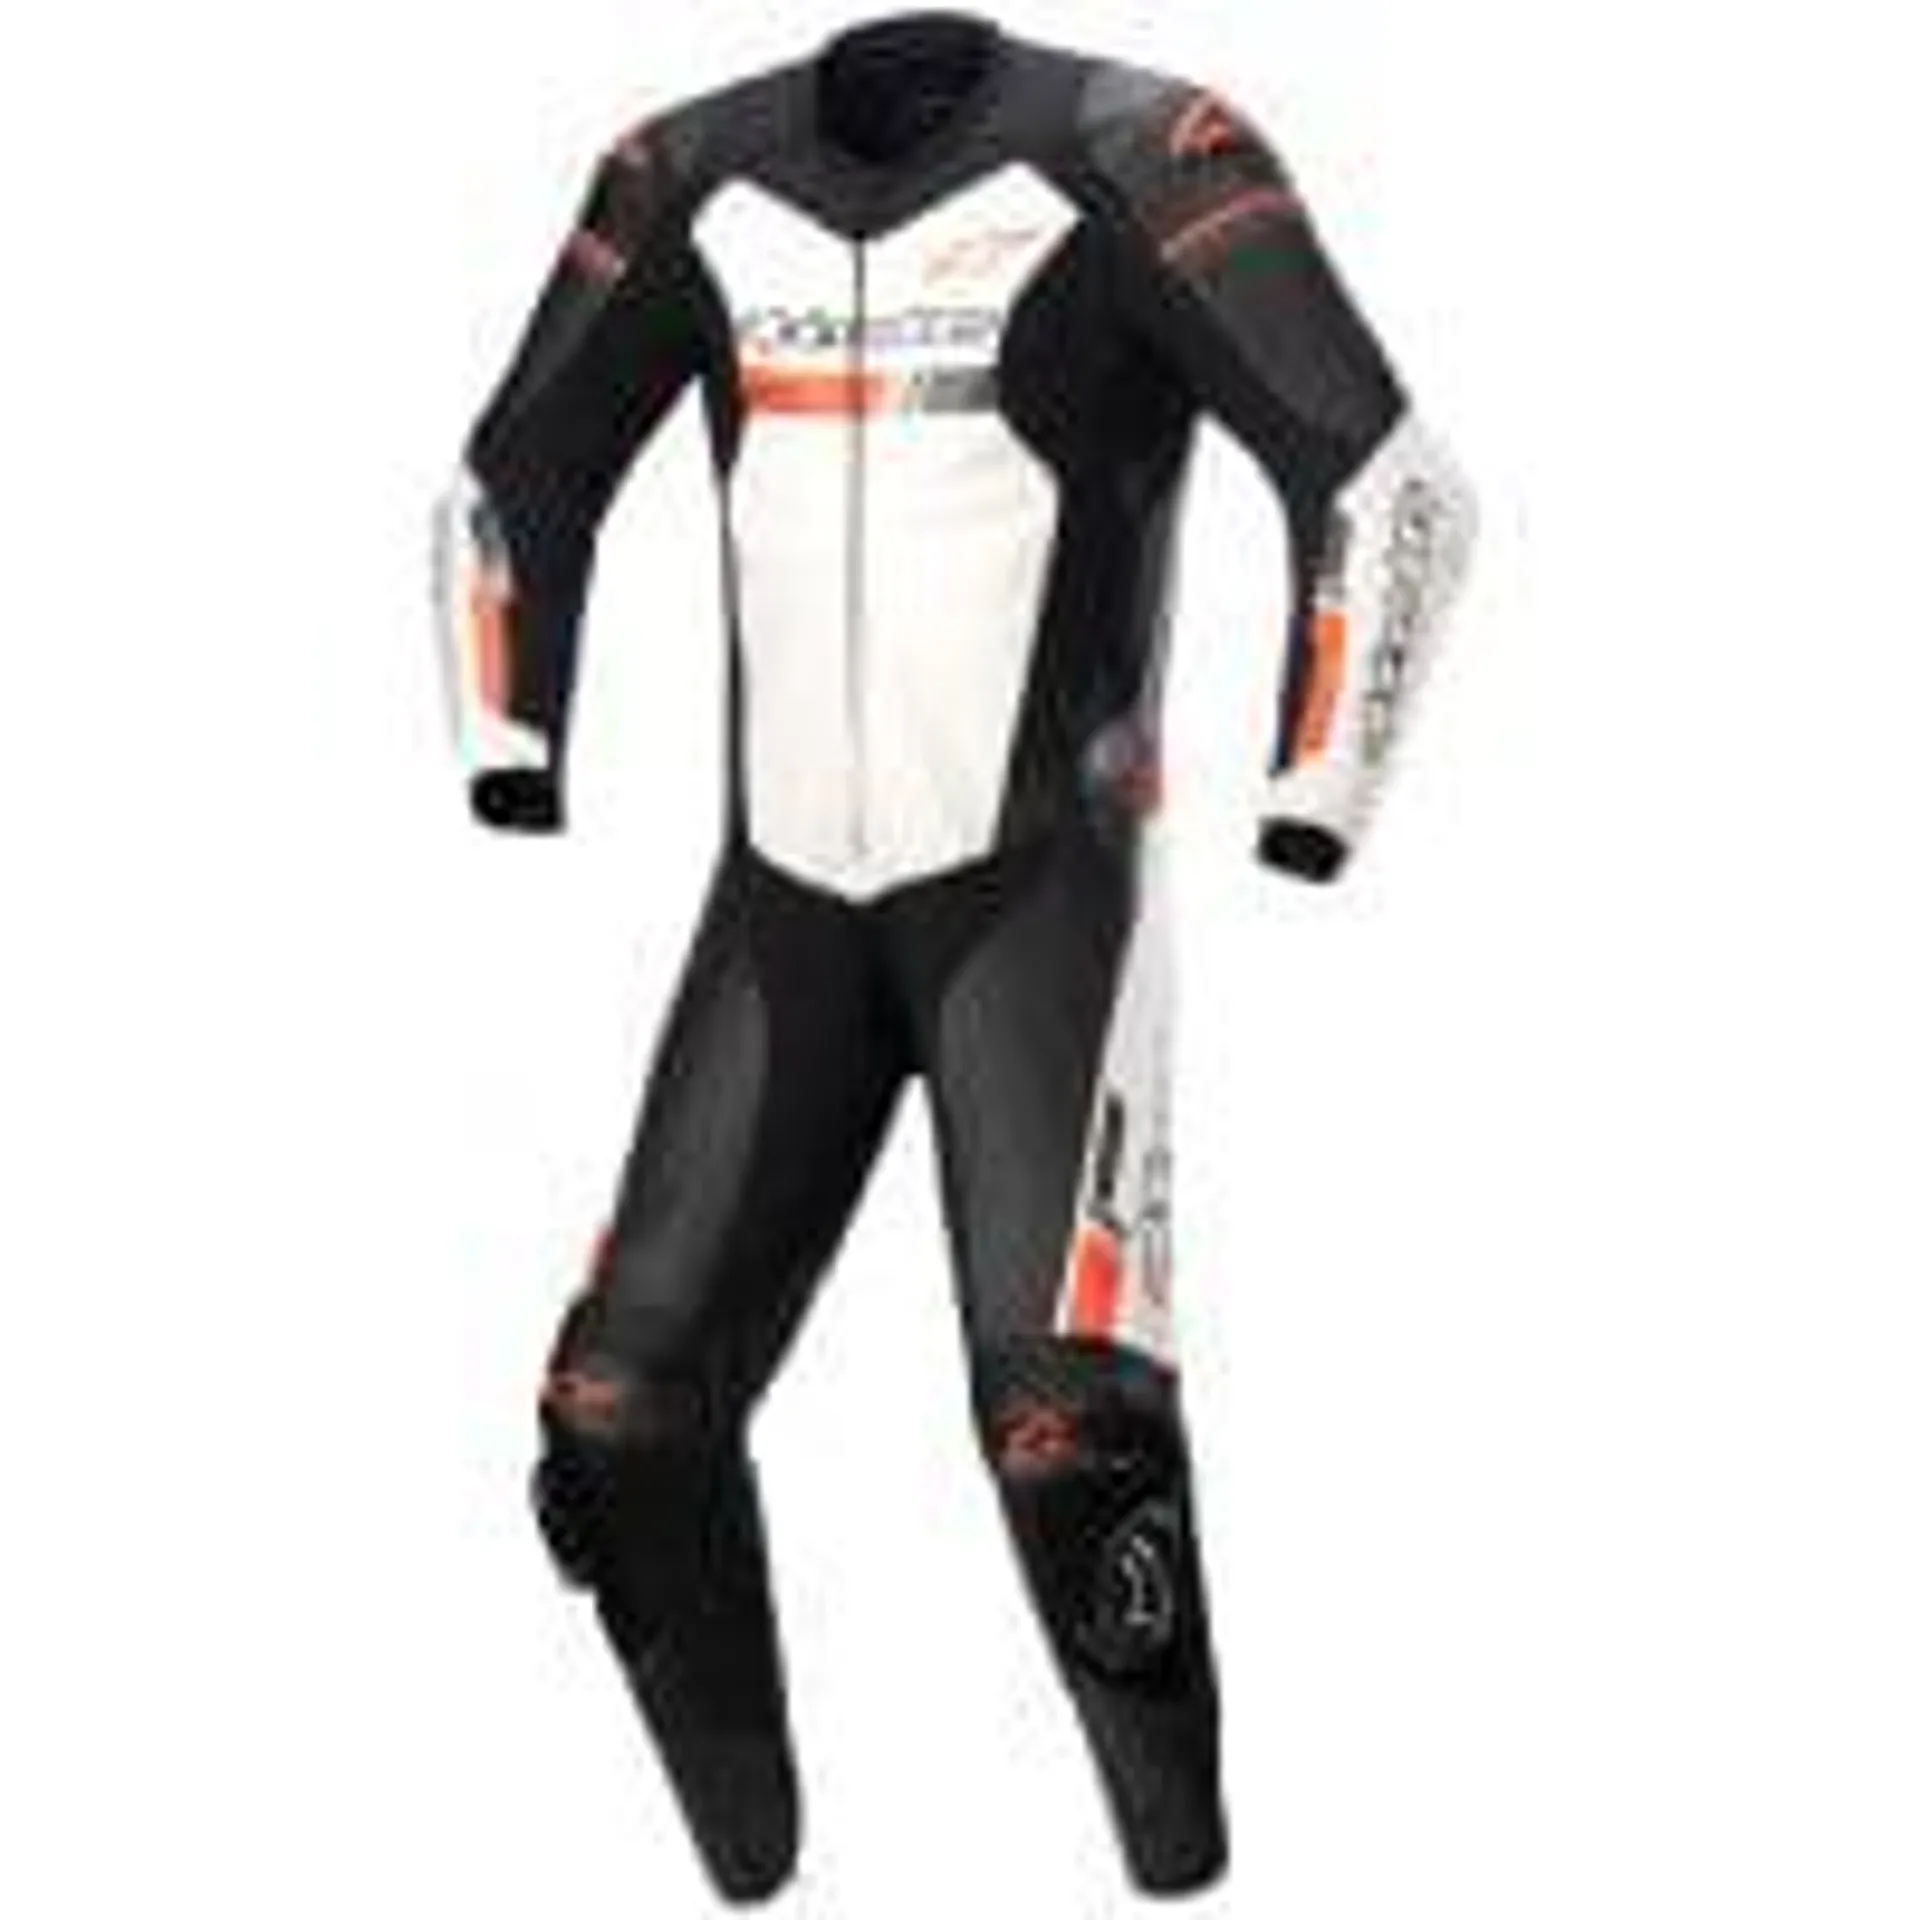 Alpinestars GP Force Chaser One Piece Leather Suit - Black / White / Red Fluo